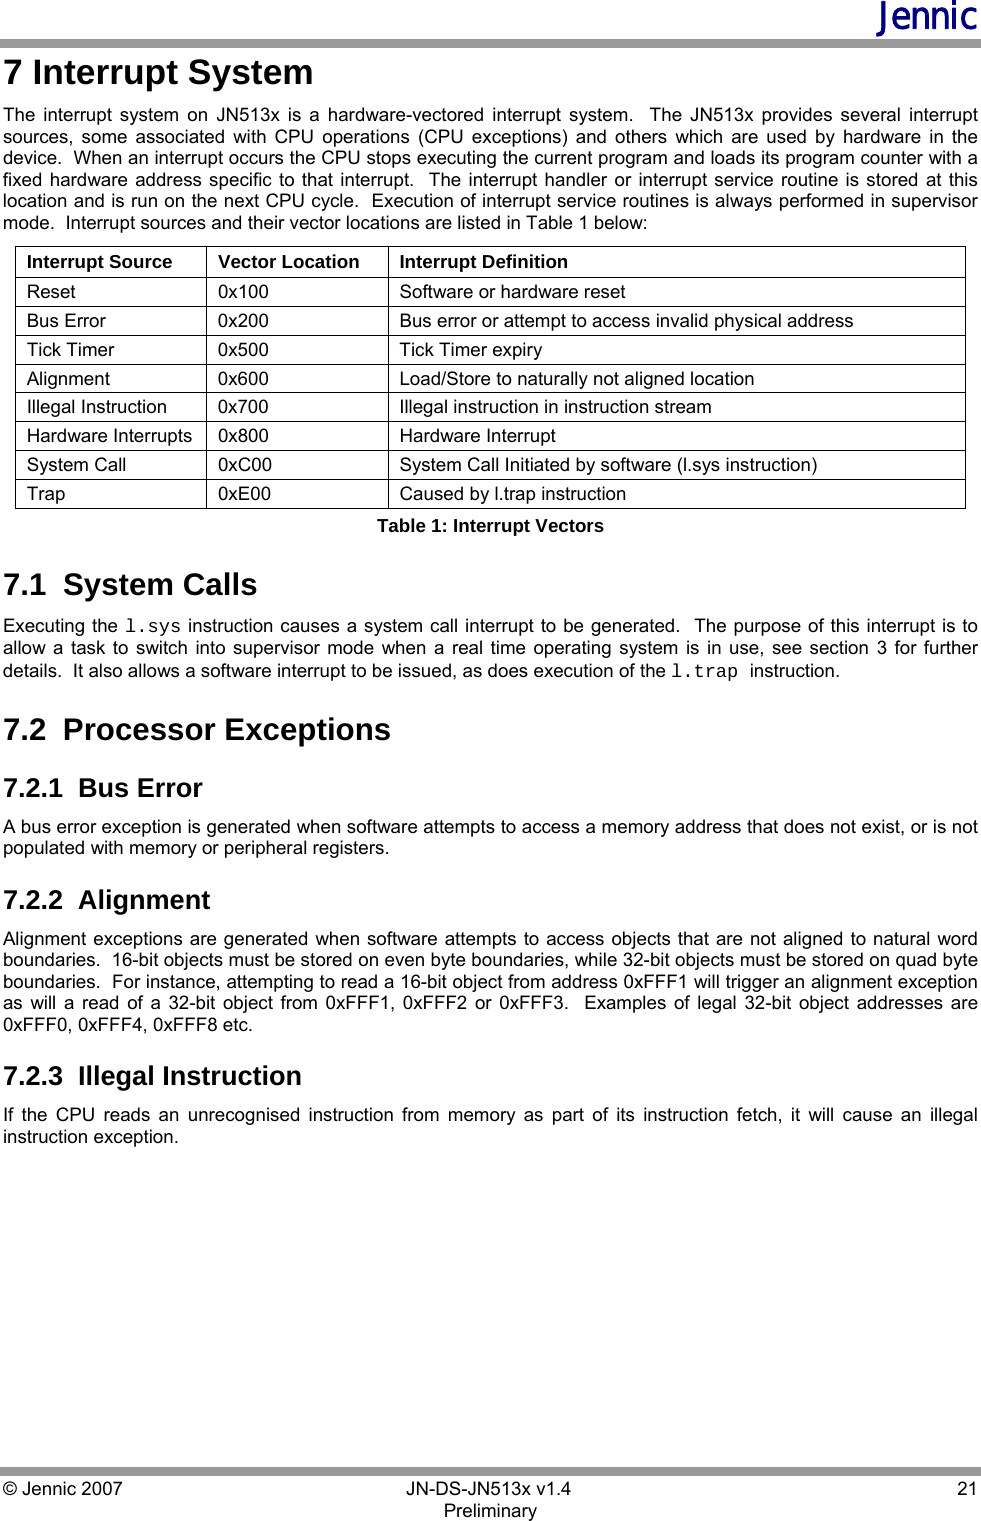 Jennic © Jennic 2007        JN-DS-JN513x v1.4  21 Preliminary 7 Interrupt System The interrupt system on JN513x is a hardware-vectored interrupt system.  The JN513x provides several interrupt sources, some associated with CPU operations (CPU exceptions) and others which are used by hardware in the device.  When an interrupt occurs the CPU stops executing the current program and loads its program counter with a fixed hardware address specific to that interrupt.  The interrupt handler or interrupt service routine is stored at this location and is run on the next CPU cycle.  Execution of interrupt service routines is always performed in supervisor mode.  Interrupt sources and their vector locations are listed in Table 1 below: Interrupt Source  Vector Location  Interrupt Definition Reset  0x100  Software or hardware reset Bus Error  0x200   Bus error or attempt to access invalid physical address Tick Timer  0x500  Tick Timer expiry Alignment 0x600  Load/Store to naturally not aligned location Illegal Instruction  0x700  Illegal instruction in instruction stream Hardware Interrupts  0x800  Hardware Interrupt  System Call  0xC00  System Call Initiated by software (l.sys instruction) Trap  0xE00  Caused by l.trap instruction Table 1: Interrupt Vectors 7.1  System Calls Executing the l.sys instruction causes a system call interrupt to be generated.  The purpose of this interrupt is to allow a task to switch into supervisor mode when a real time operating system is in use, see section 3 for further details.  It also allows a software interrupt to be issued, as does execution of the l.trap instruction. 7.2  Processor Exceptions 7.2.1  Bus Error A bus error exception is generated when software attempts to access a memory address that does not exist, or is not populated with memory or peripheral registers. 7.2.2  Alignment Alignment exceptions are generated when software attempts to access objects that are not aligned to natural word boundaries.  16-bit objects must be stored on even byte boundaries, while 32-bit objects must be stored on quad byte boundaries.  For instance, attempting to read a 16-bit object from address 0xFFF1 will trigger an alignment exception as will a read of a 32-bit object from 0xFFF1, 0xFFF2 or 0xFFF3.  Examples of legal 32-bit object addresses are 0xFFF0, 0xFFF4, 0xFFF8 etc. 7.2.3  Illegal Instruction If the CPU reads an unrecognised instruction from memory as part of its instruction fetch, it will cause an illegal instruction exception.   